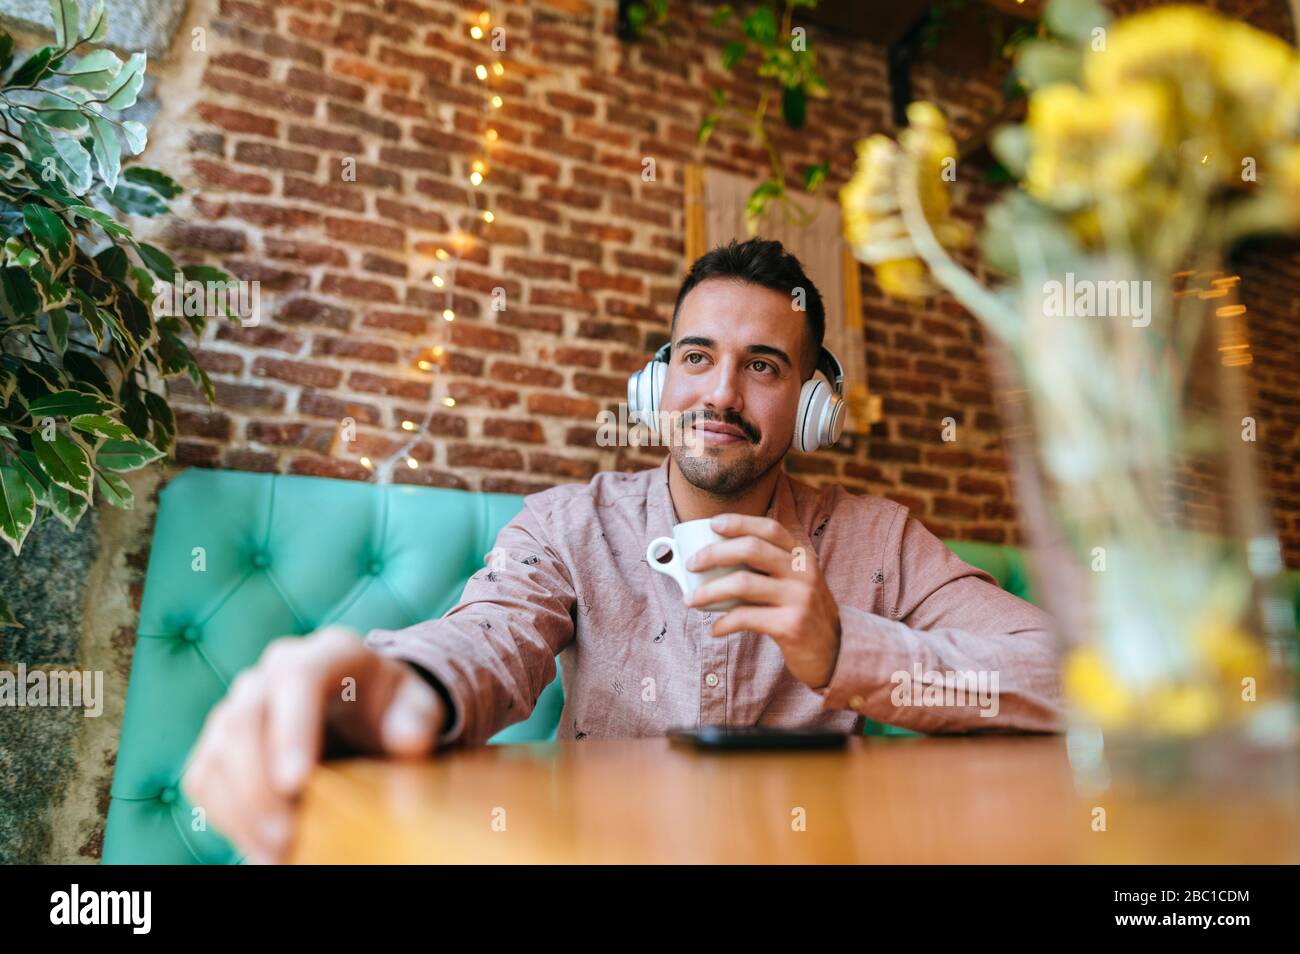 Smiling man in a cafe listening to music with headphones Stock Photo